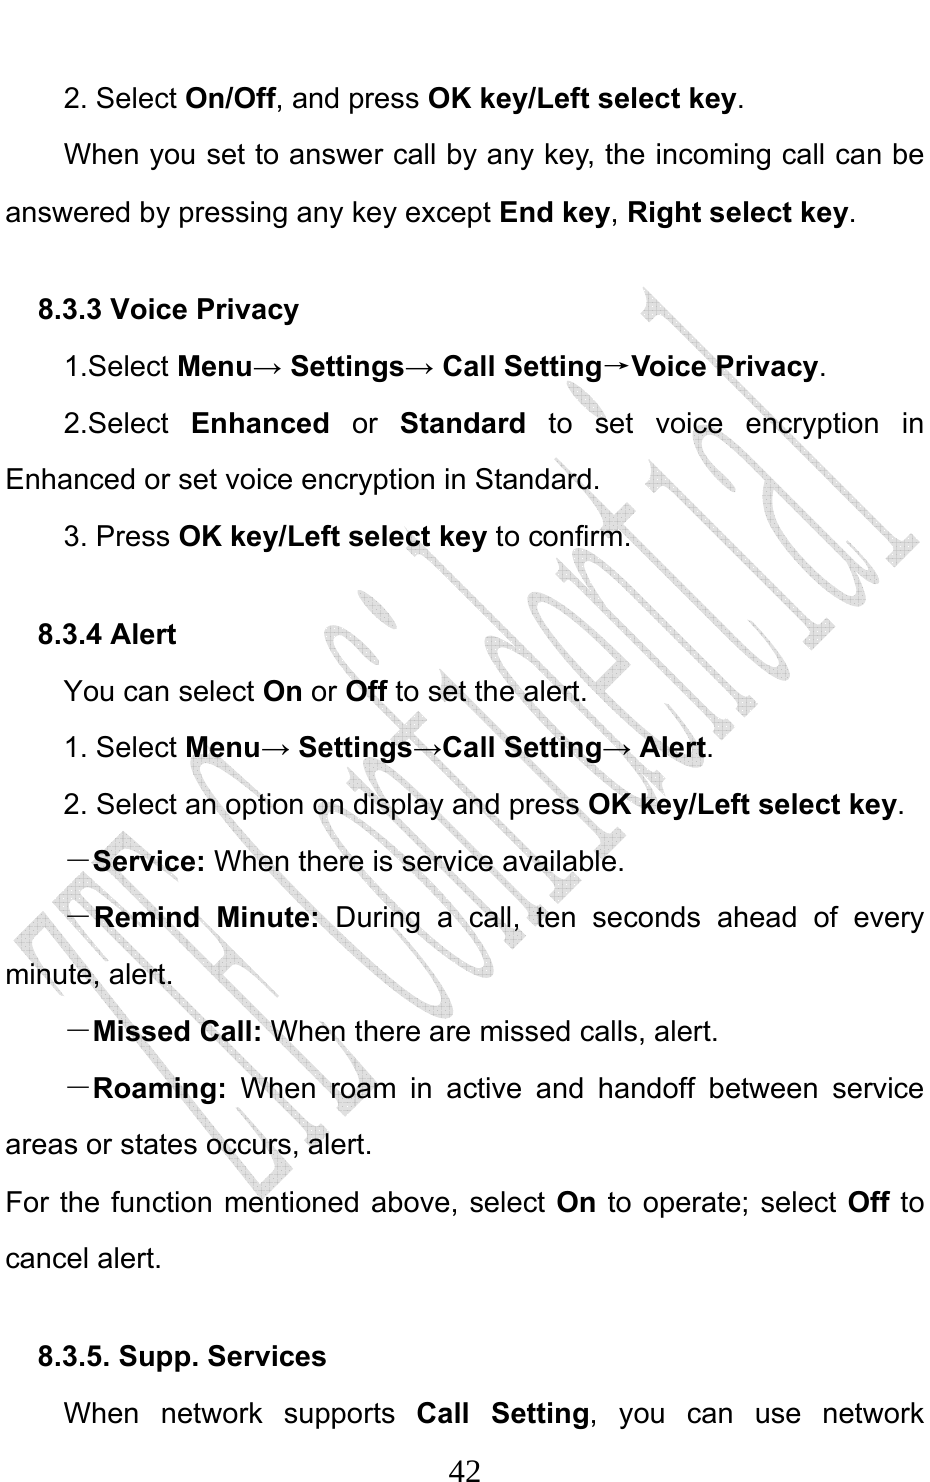                              422. Select On/Off, and press OK key/Left select key.         When you set to answer call by any key, the incoming call can be answered by pressing any key except End key, Right select key. 8.3.3 Voice Privacy 1.Select Menu→ Settings→ Call Setting→Voice Privacy. 2.Select Enhanced or Standard  to set voice encryption in Enhanced or set voice encryption in Standard. 3. Press OK key/Left select key to confirm. 8.3.4 Alert You can select On or Off to set the alert. 1. Select Menu→ Settings→Call Setting→ Alert. 2. Select an option on display and press OK key/Left select key. －Service: When there is service available. －Remind Minute:  During a call, ten seconds ahead of every minute, alert. －Missed Call: When there are missed calls, alert. －Roaming:  When roam in active and handoff between service areas or states occurs, alert. For the function mentioned above, select On to operate; select Off to cancel alert.   8.3.5. Supp. Services   When network supports Call Setting, you can use network 